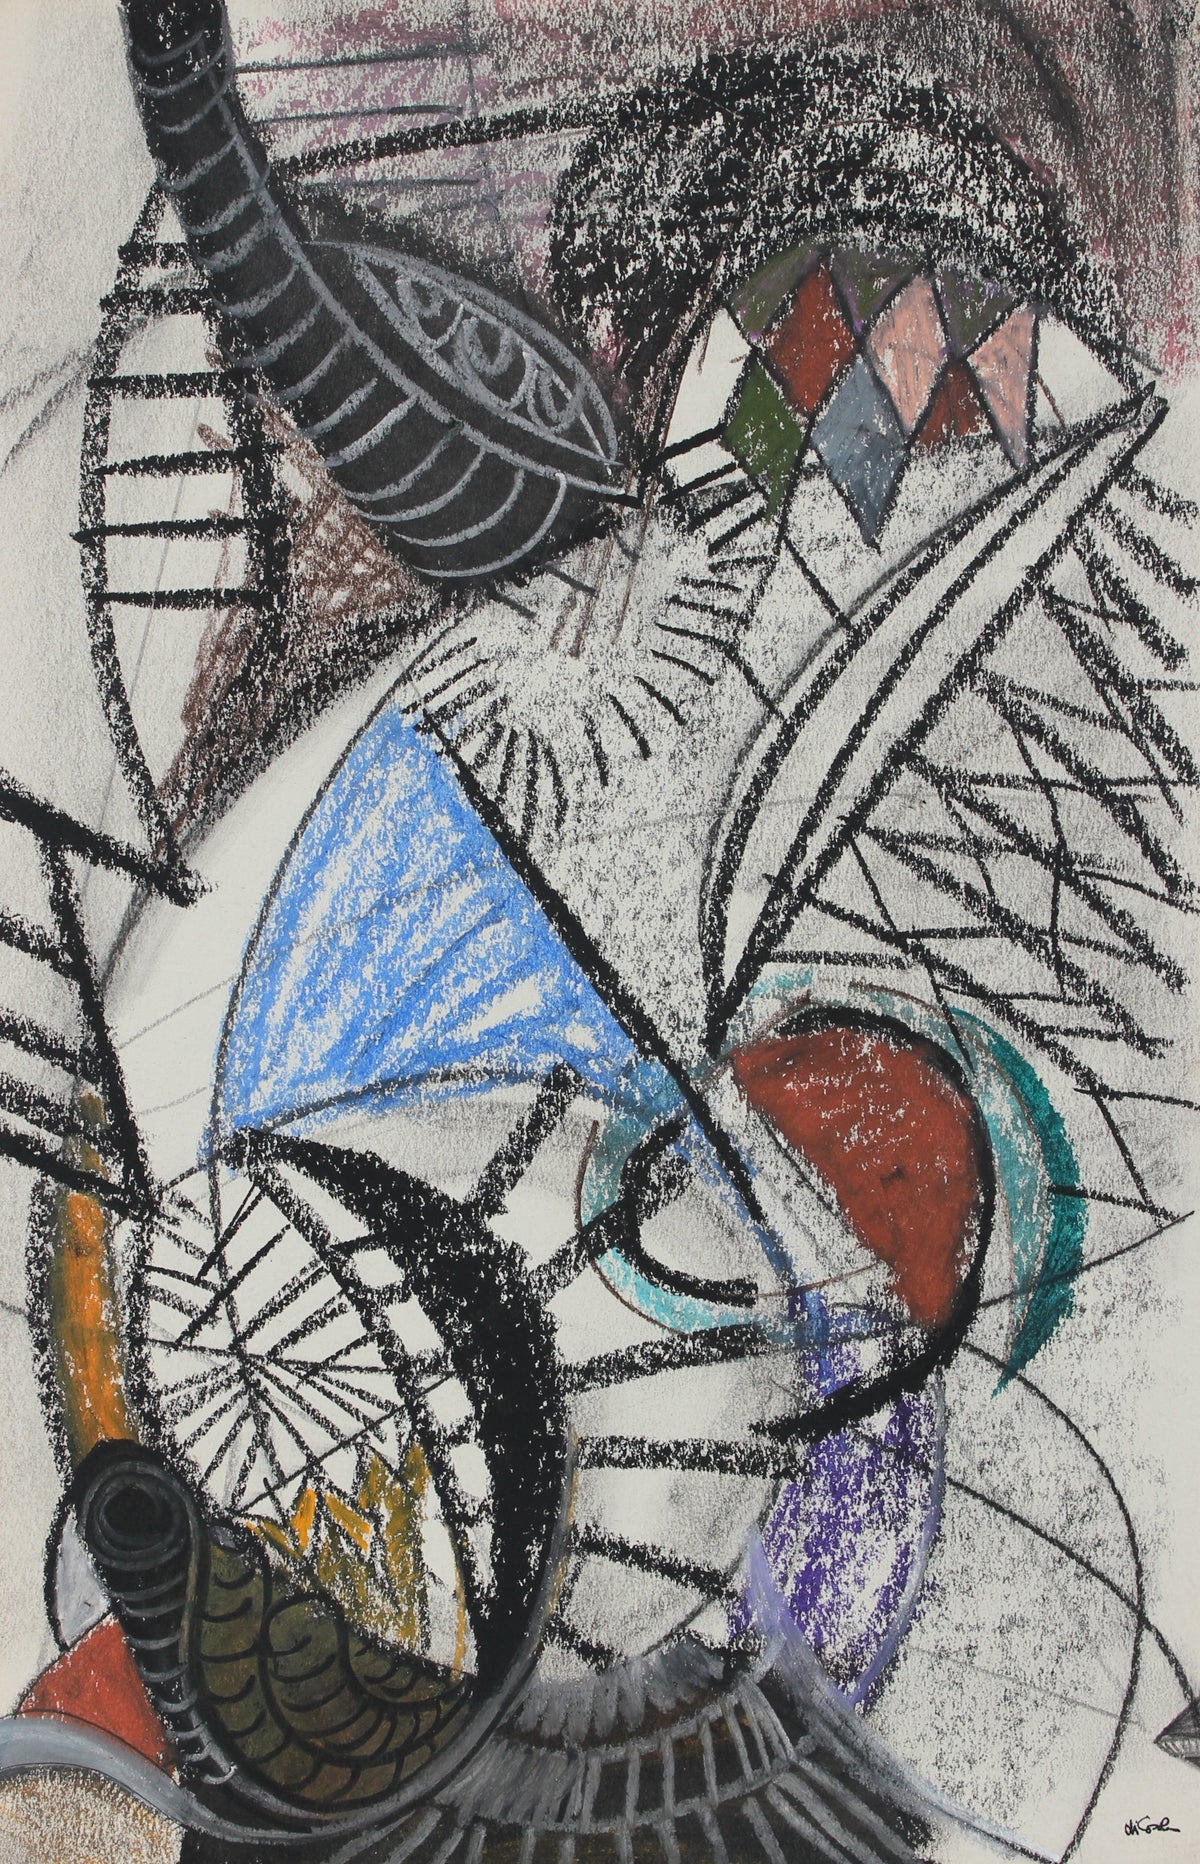 Moody Geometric Abstract &lt;br&gt;Mid-Late 20th Century Graphite, Charcoal, and Pastel &lt;br&gt;&lt;br&gt;#95758